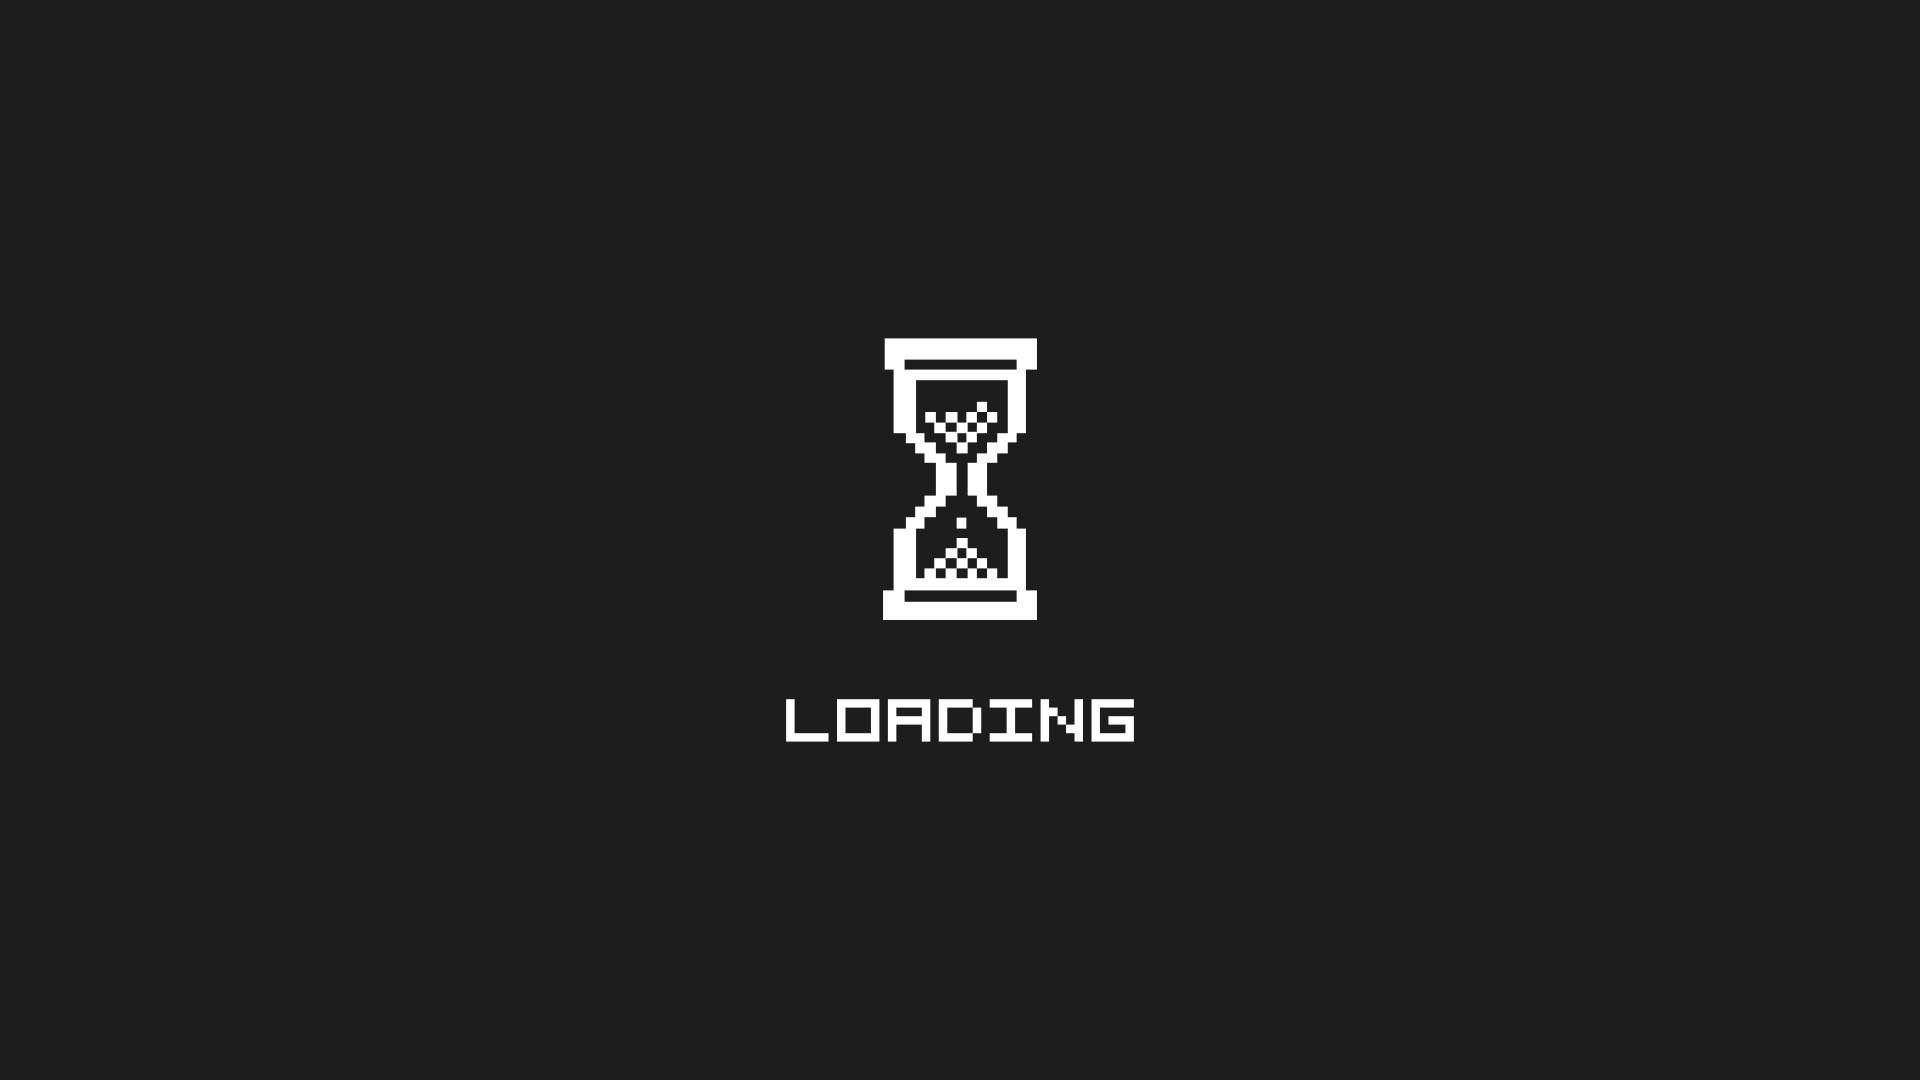 Download the Hour Glass Loading Wallpaper, Hour Glass Loading iPhone